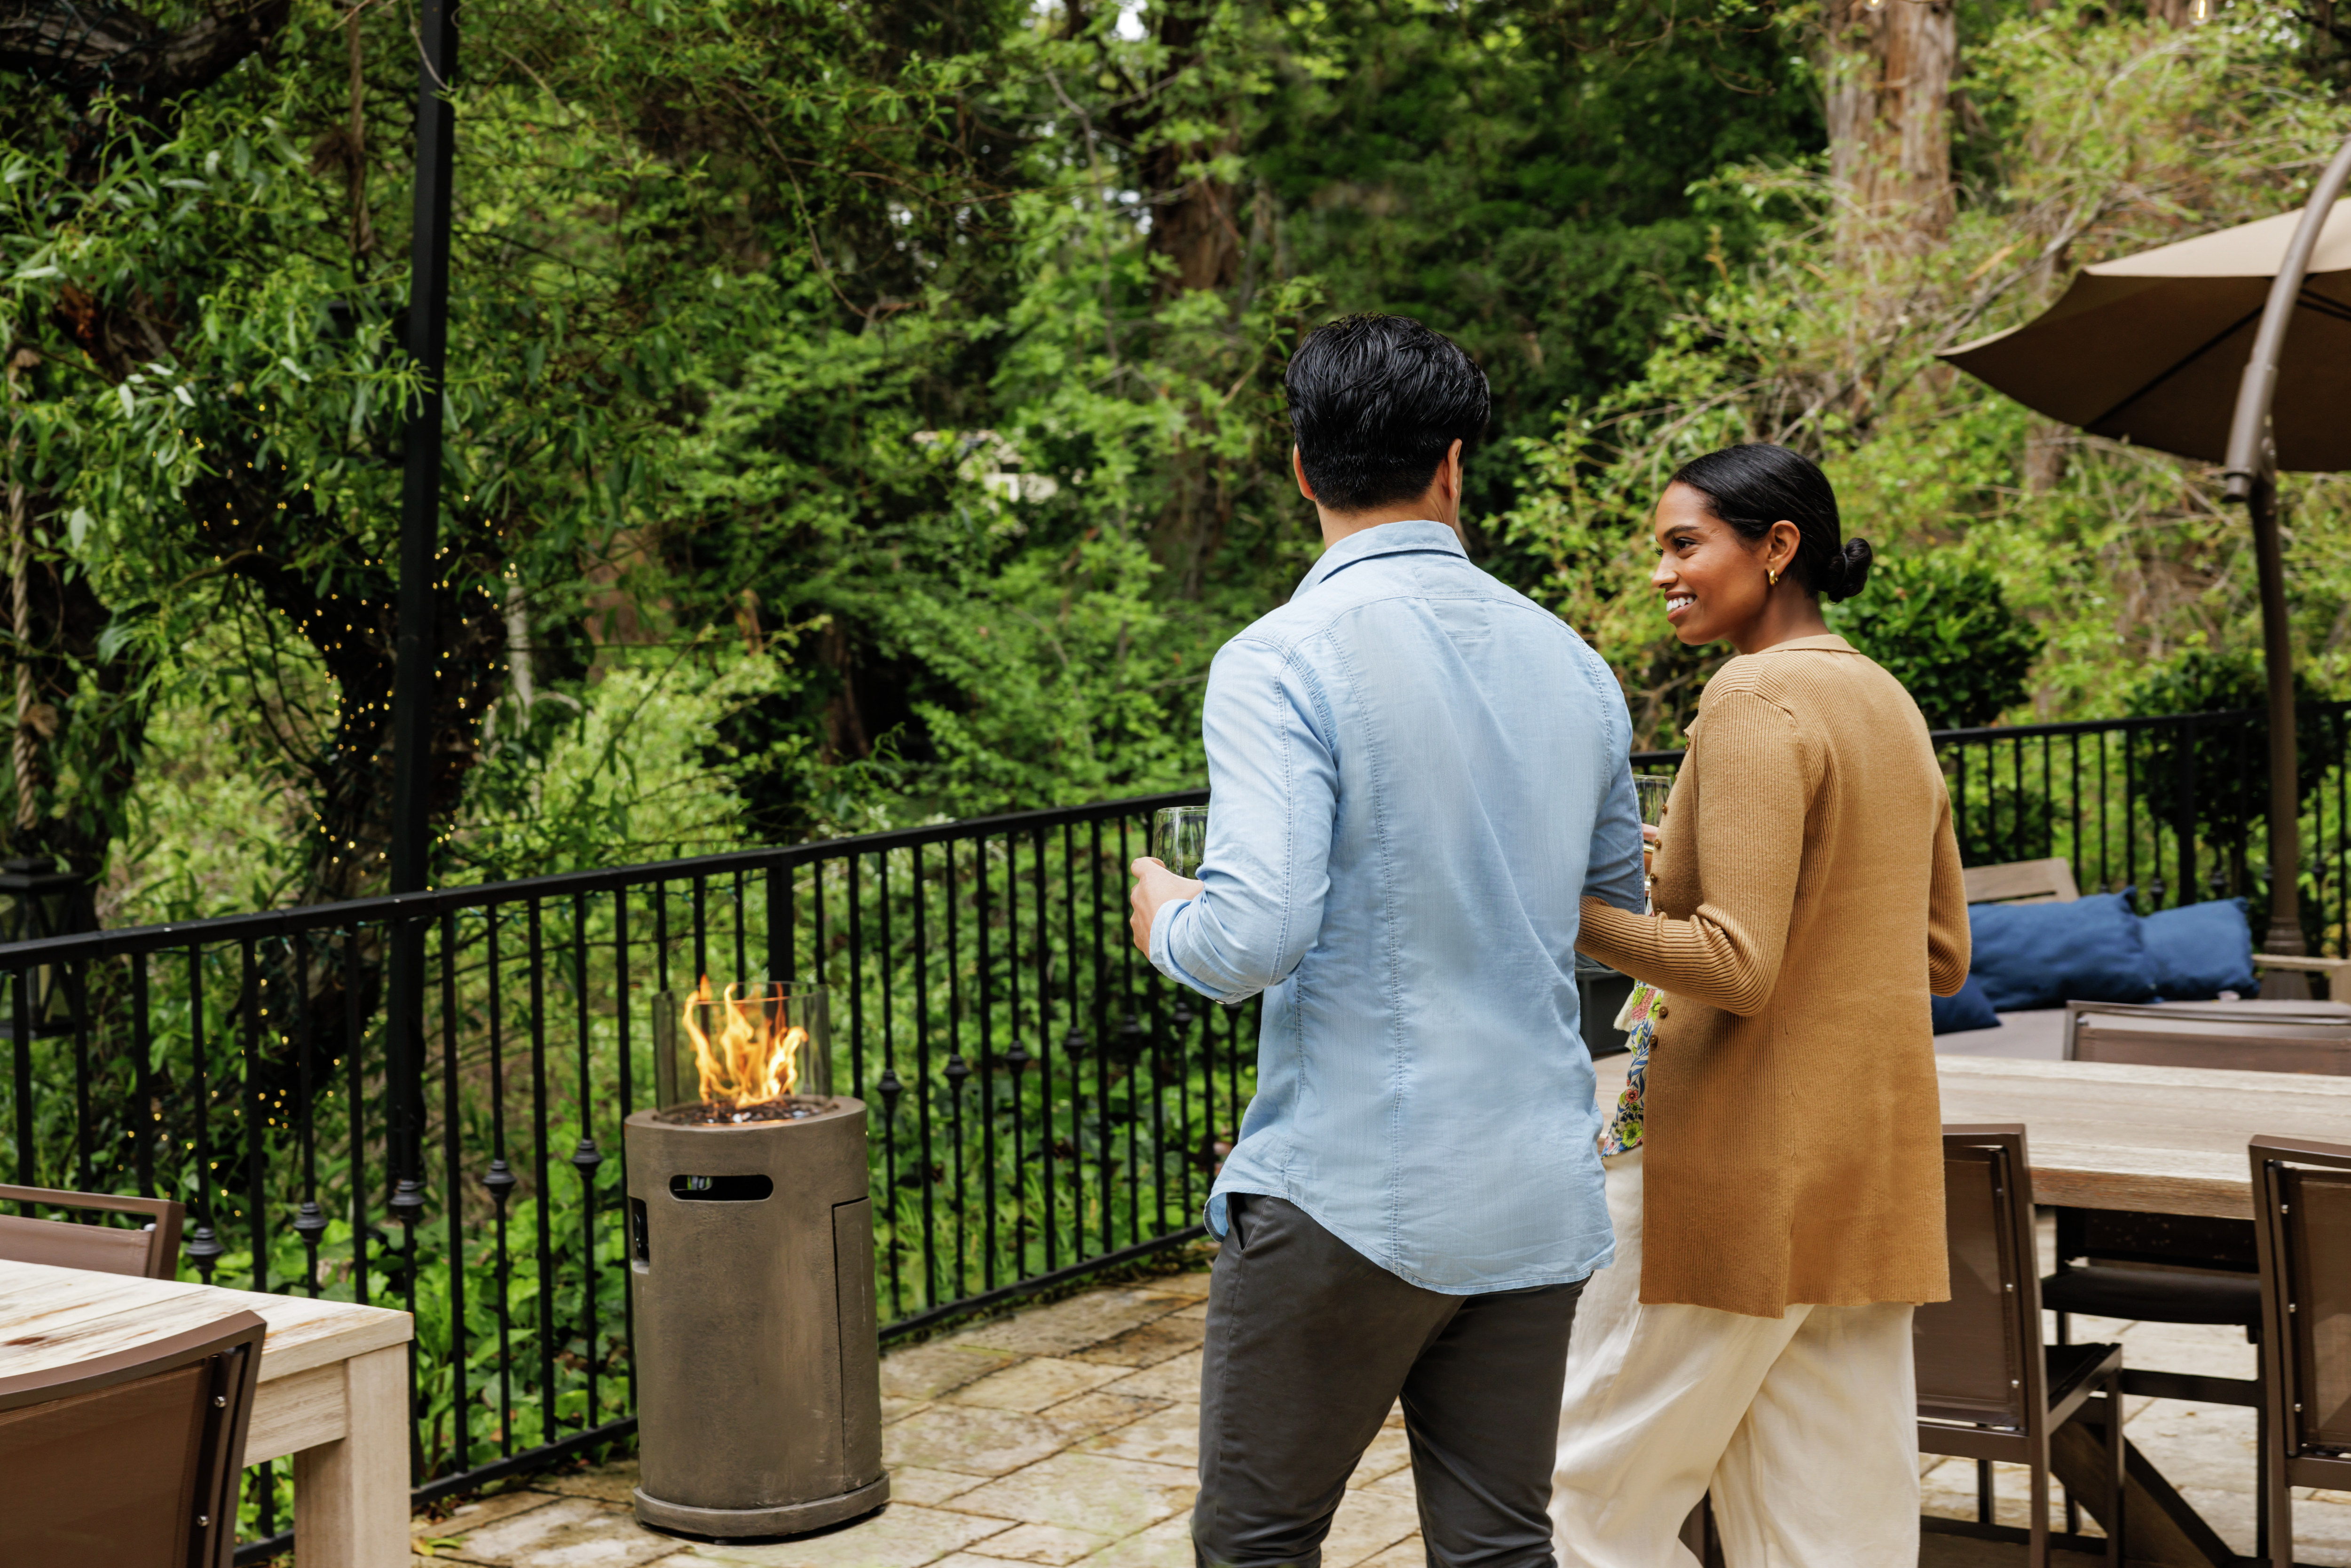 Man and woman on exterior patio with fire pit